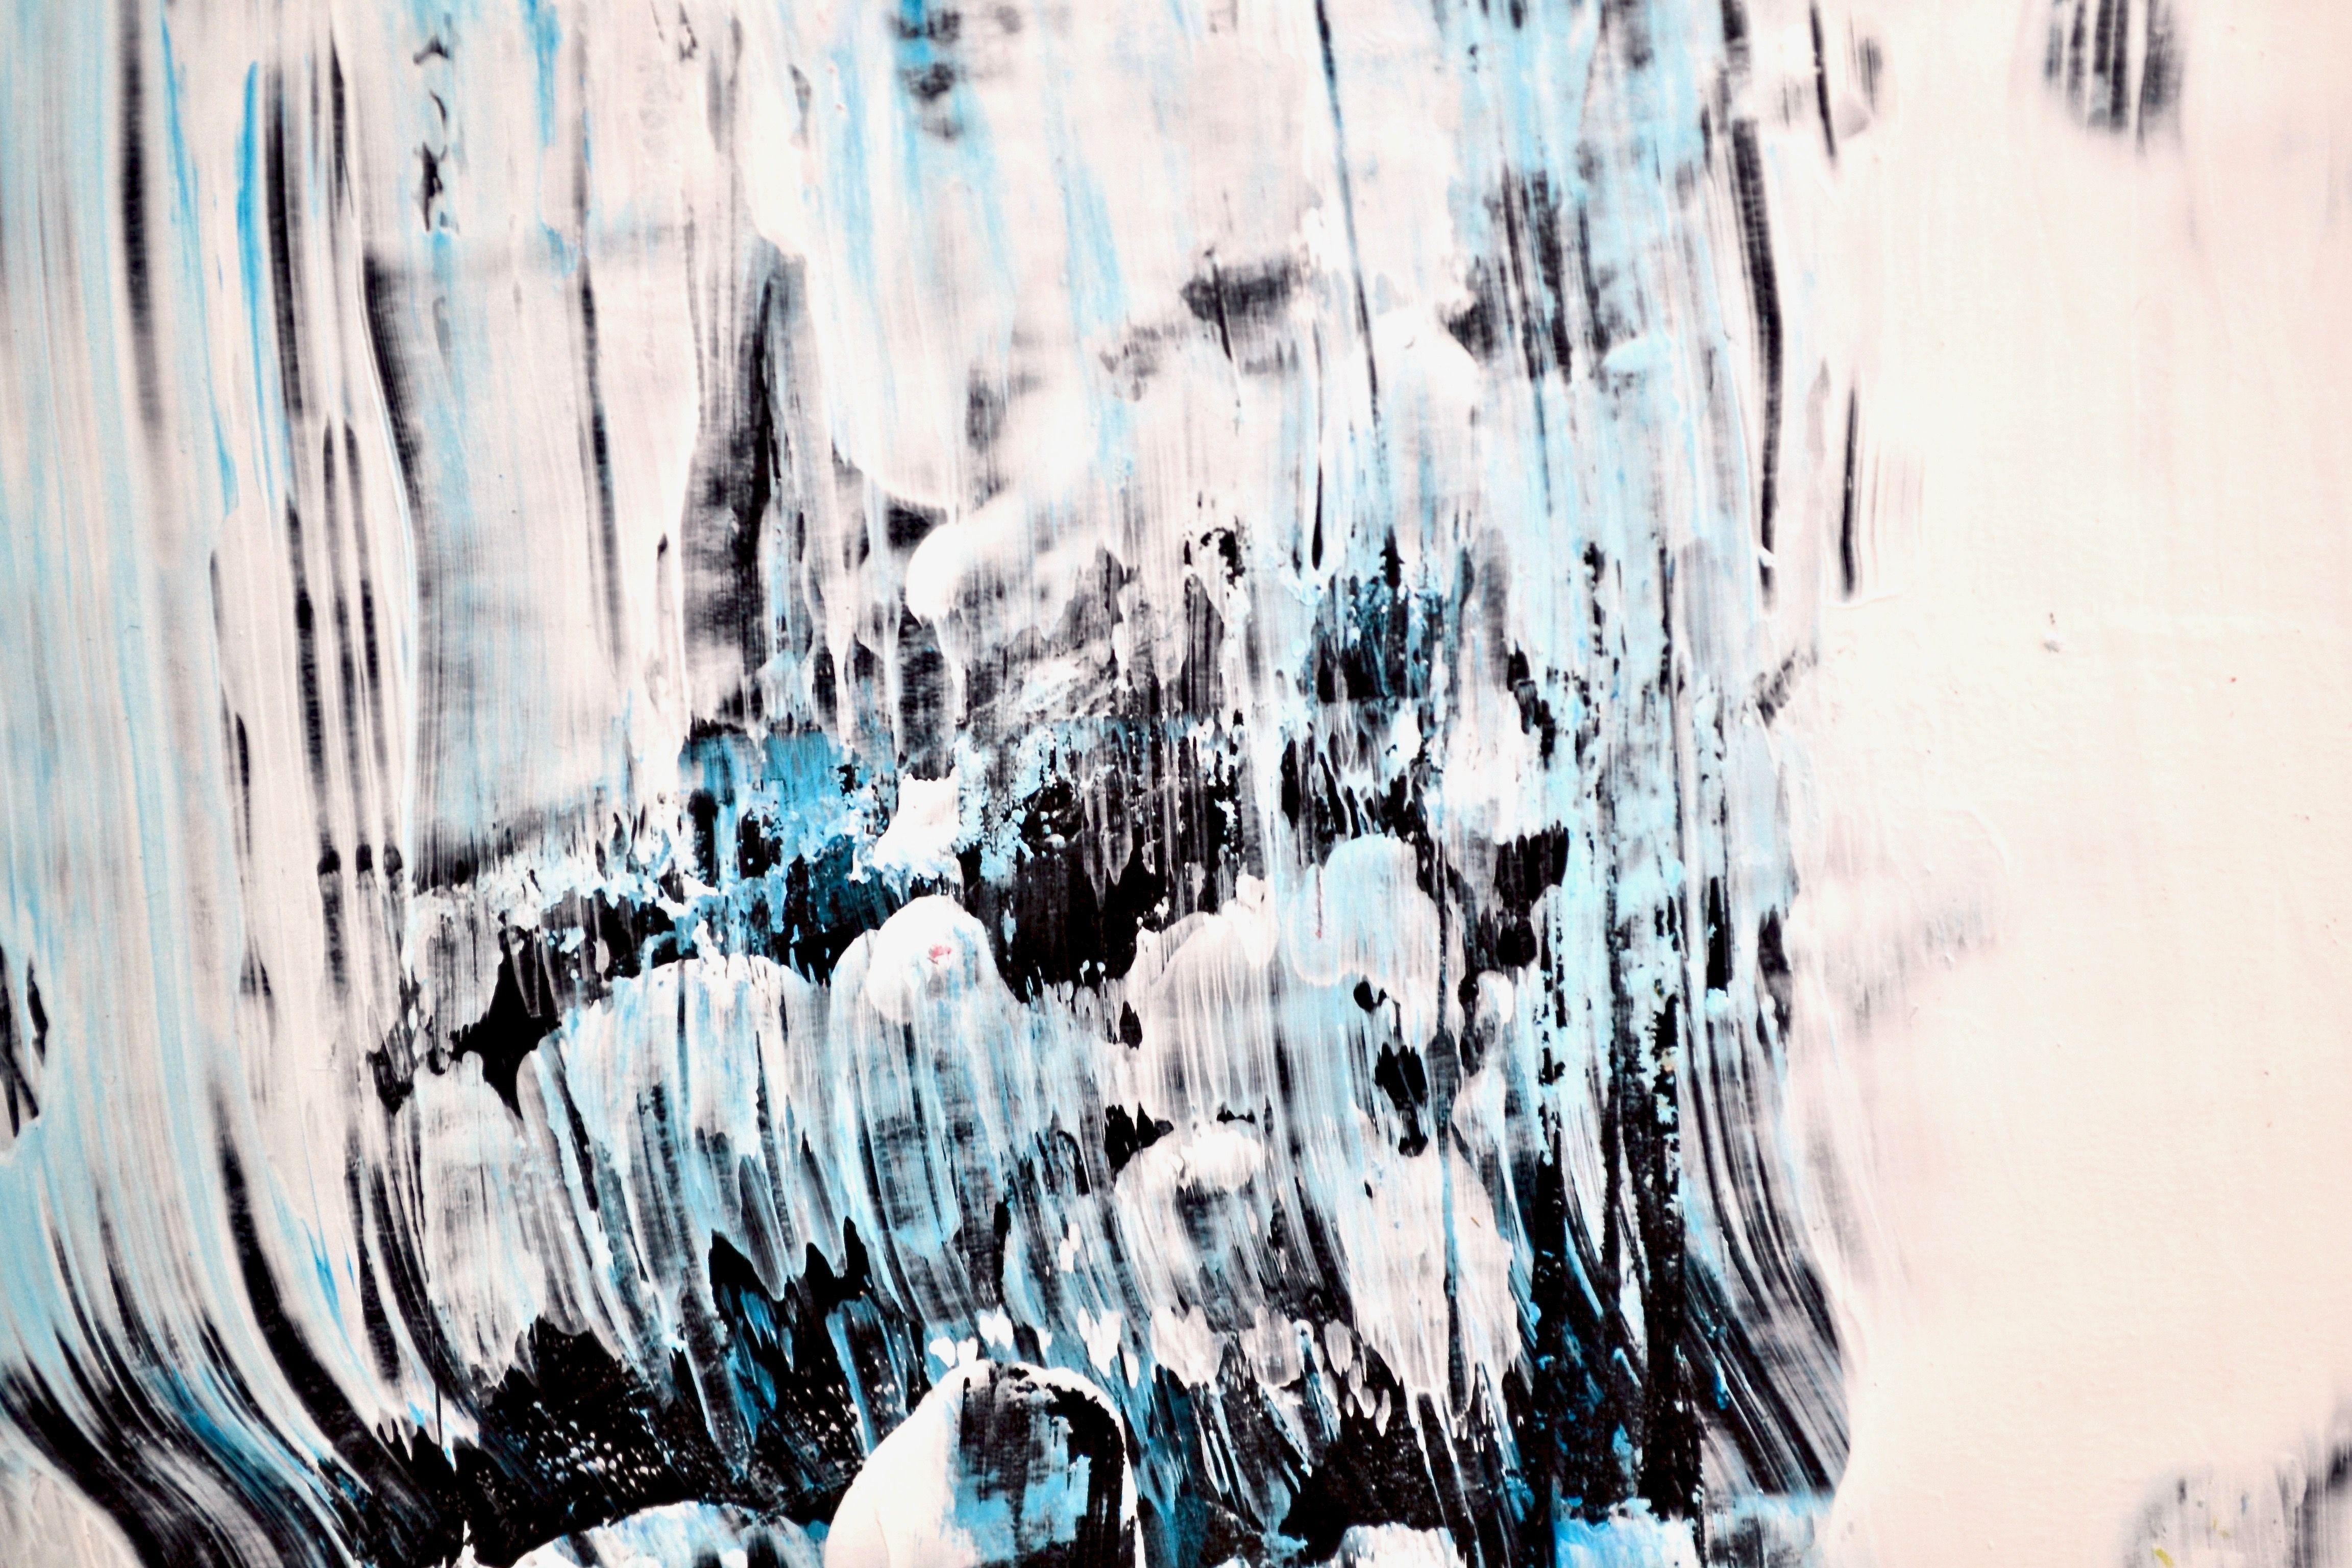 'Waterfall 3 - Blue and White On Black' is an original Abstract Expressionist painting using Acrylic paints on black printed high quality paper and including an array of blues.    The black paper background was 'recycled' from the back of a